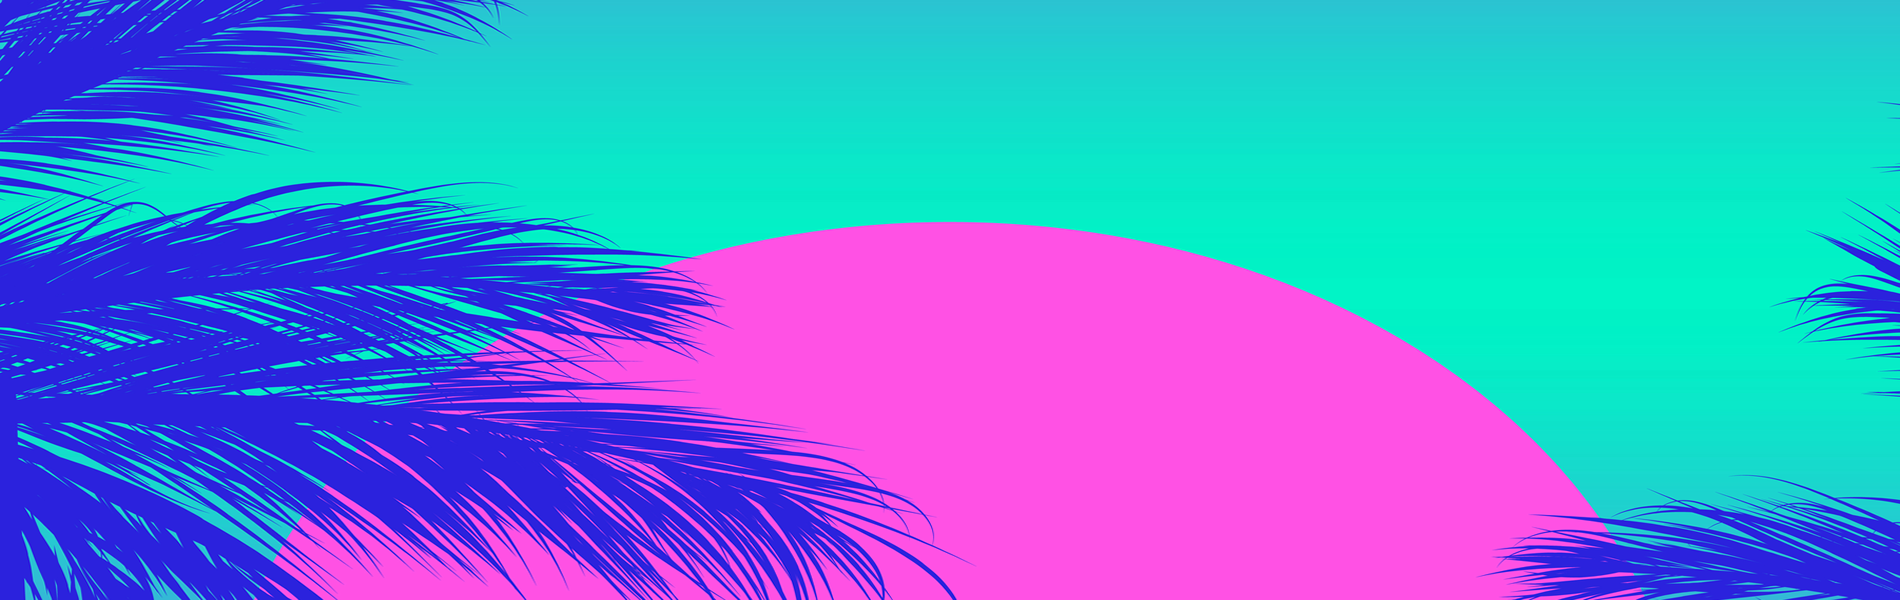 Sunset in 80s colors